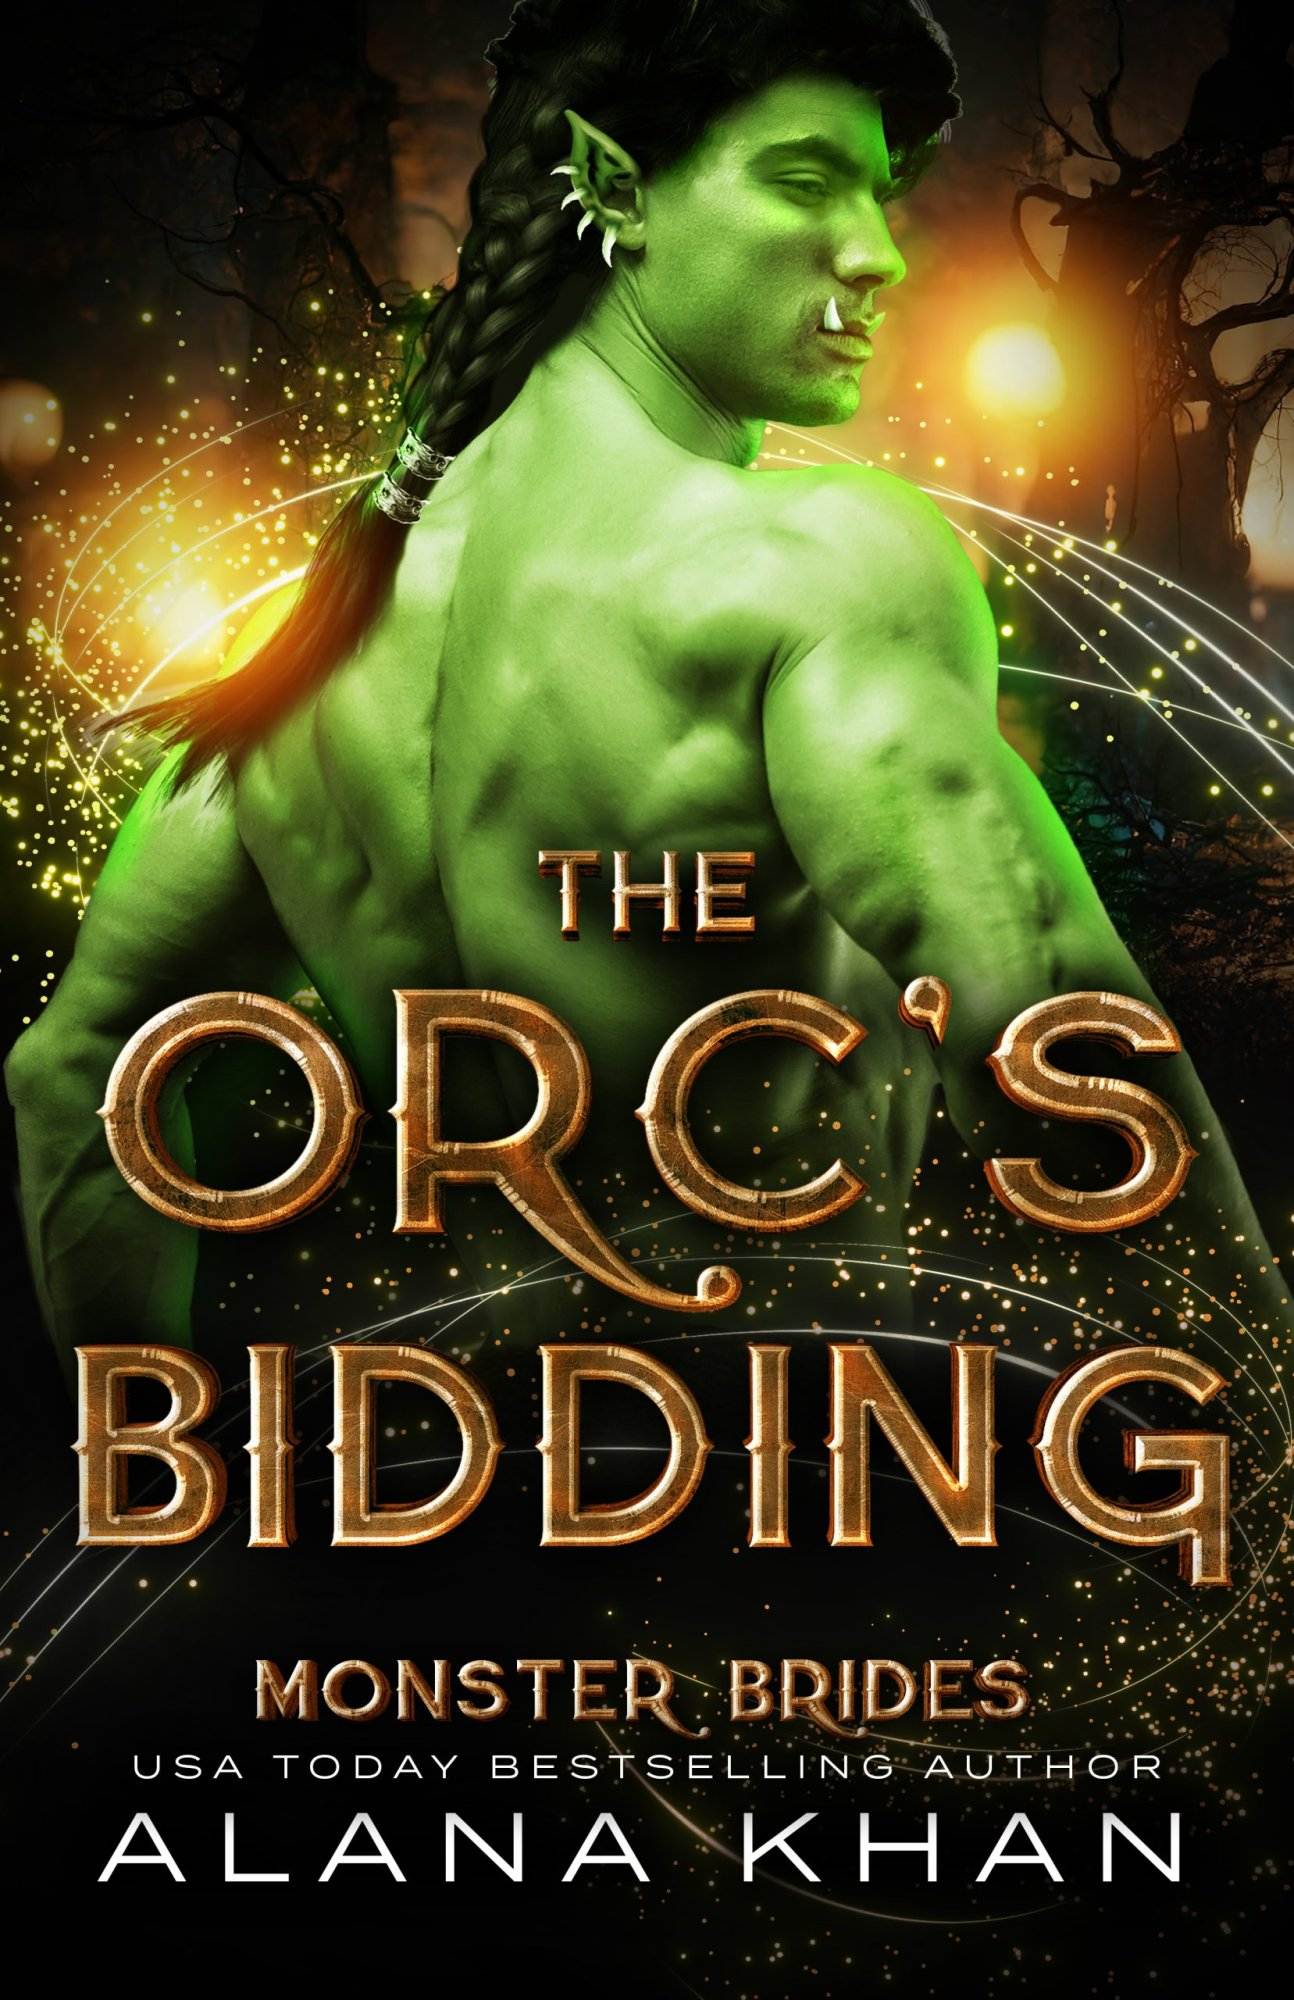 The Orc's Bidding